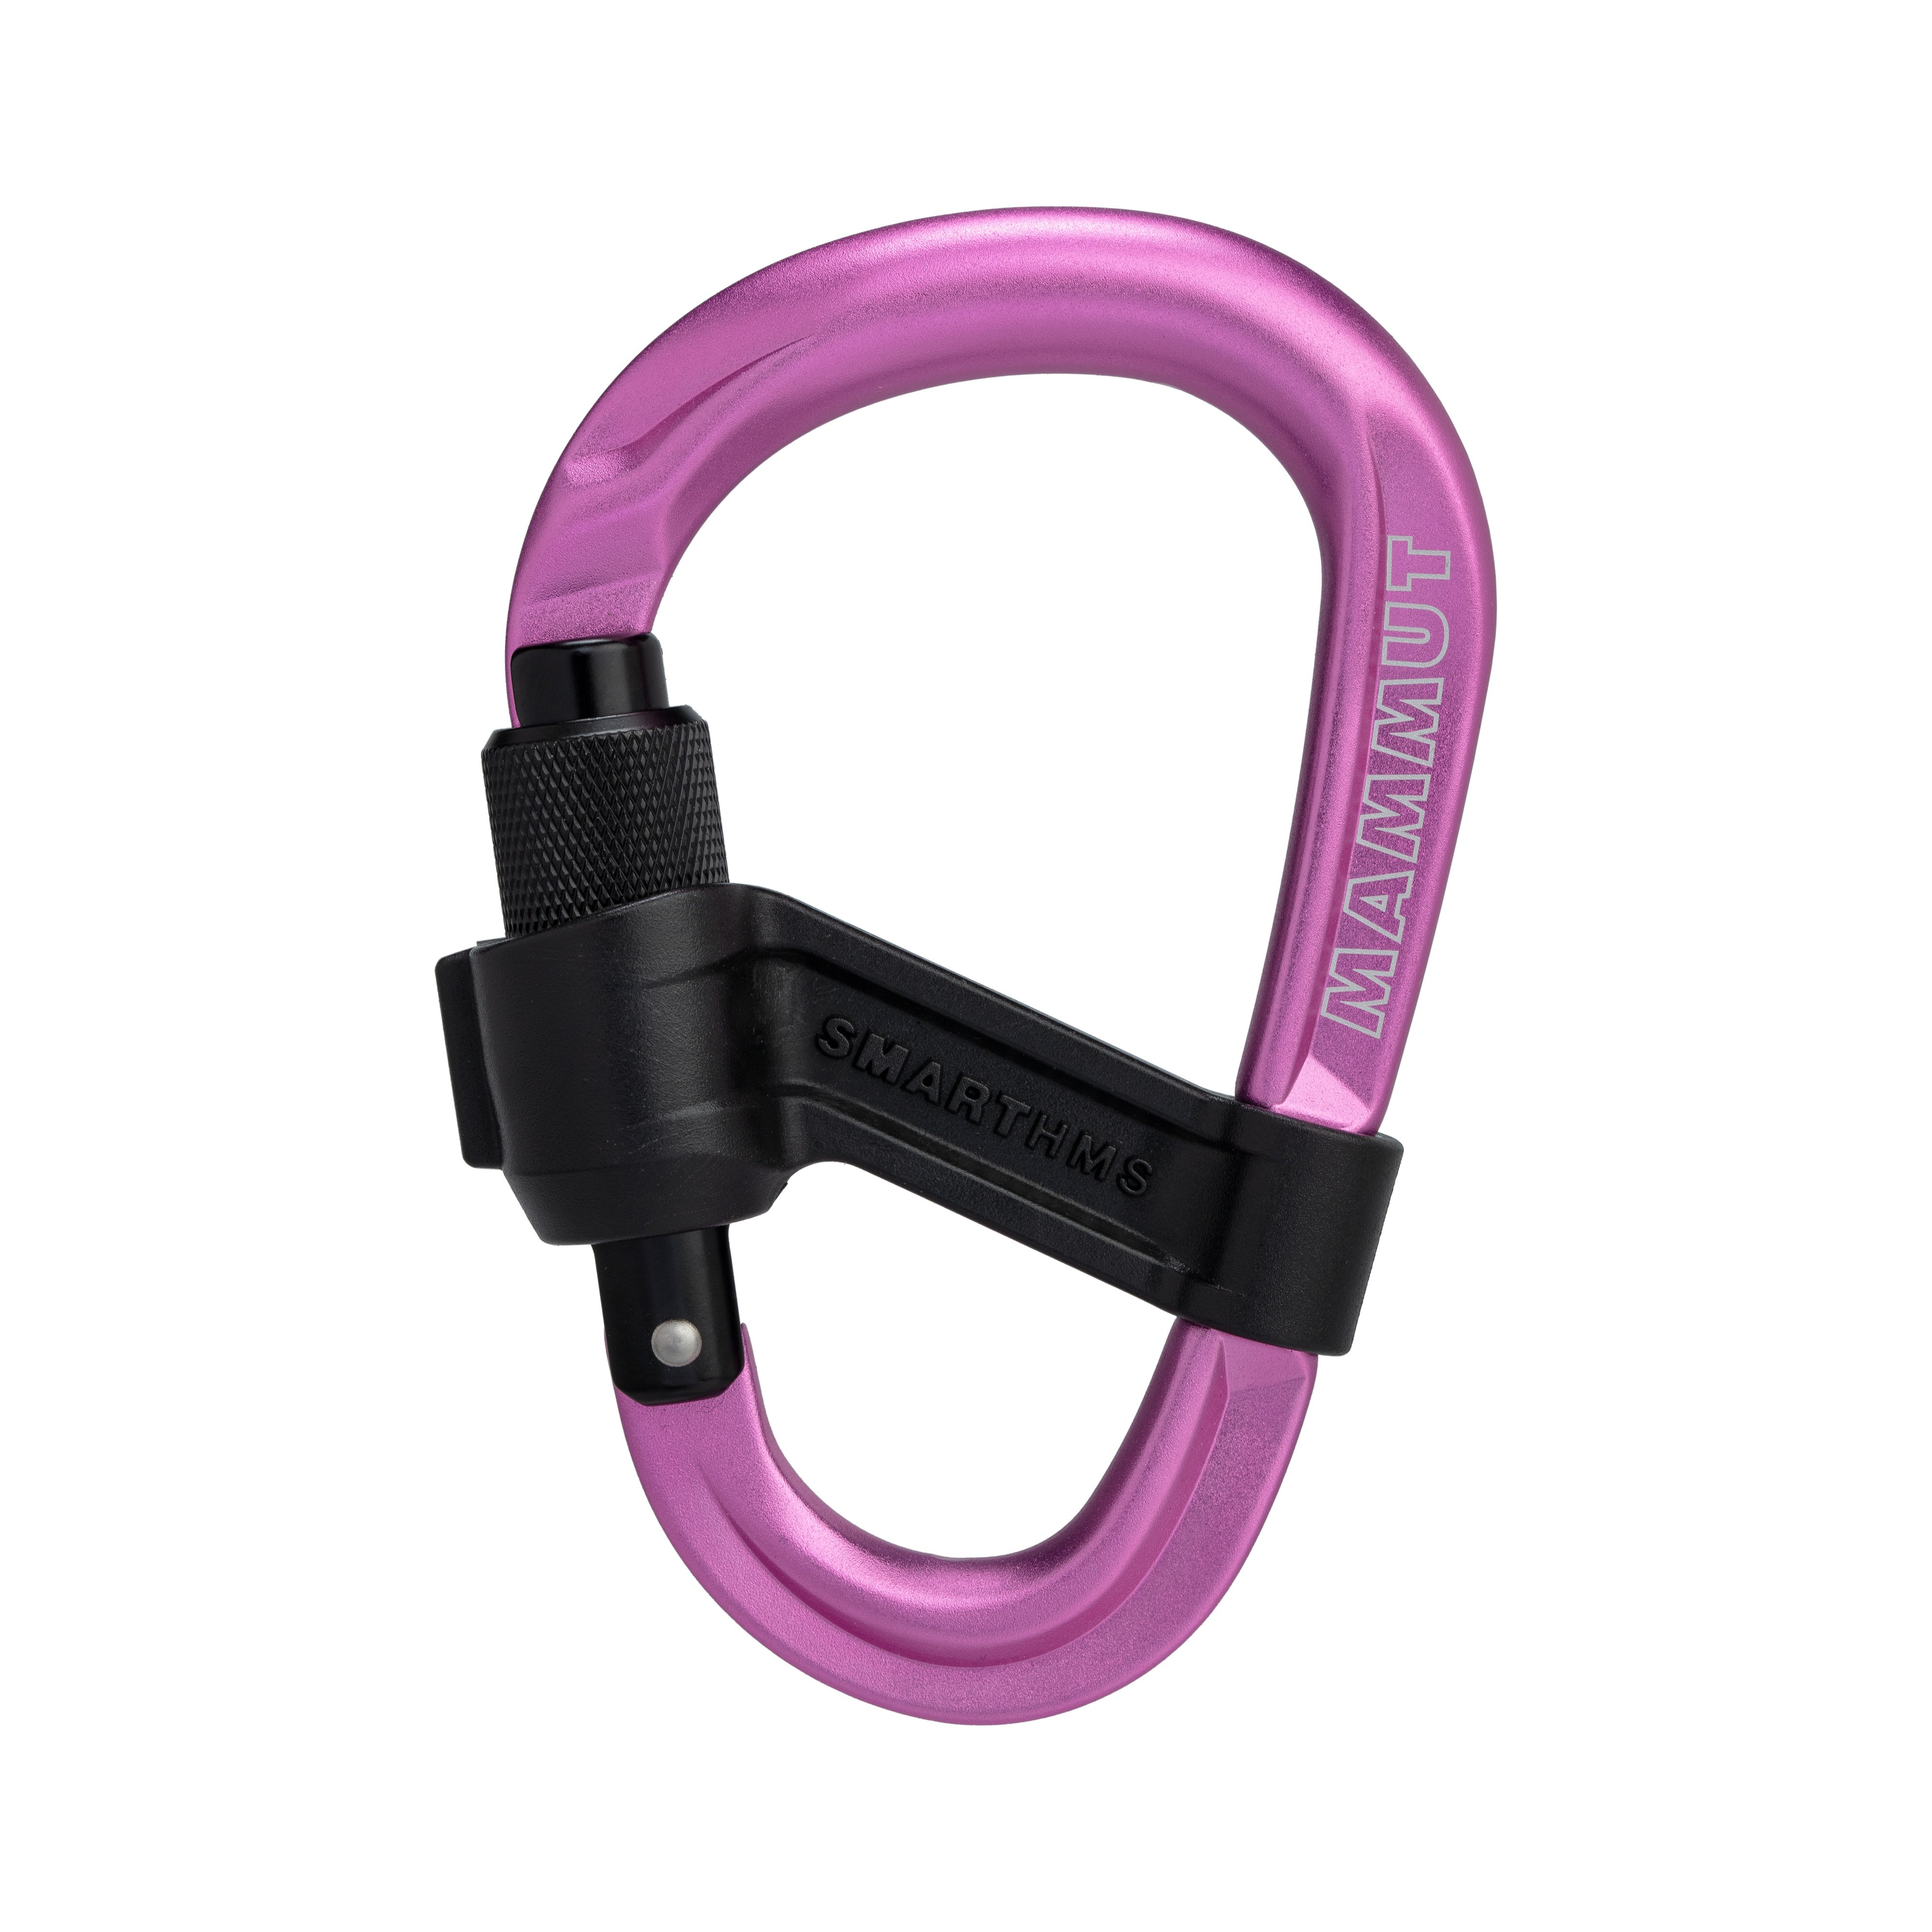 Smart HMS 2.0 Screwgate Carabiner - pink, one size product image